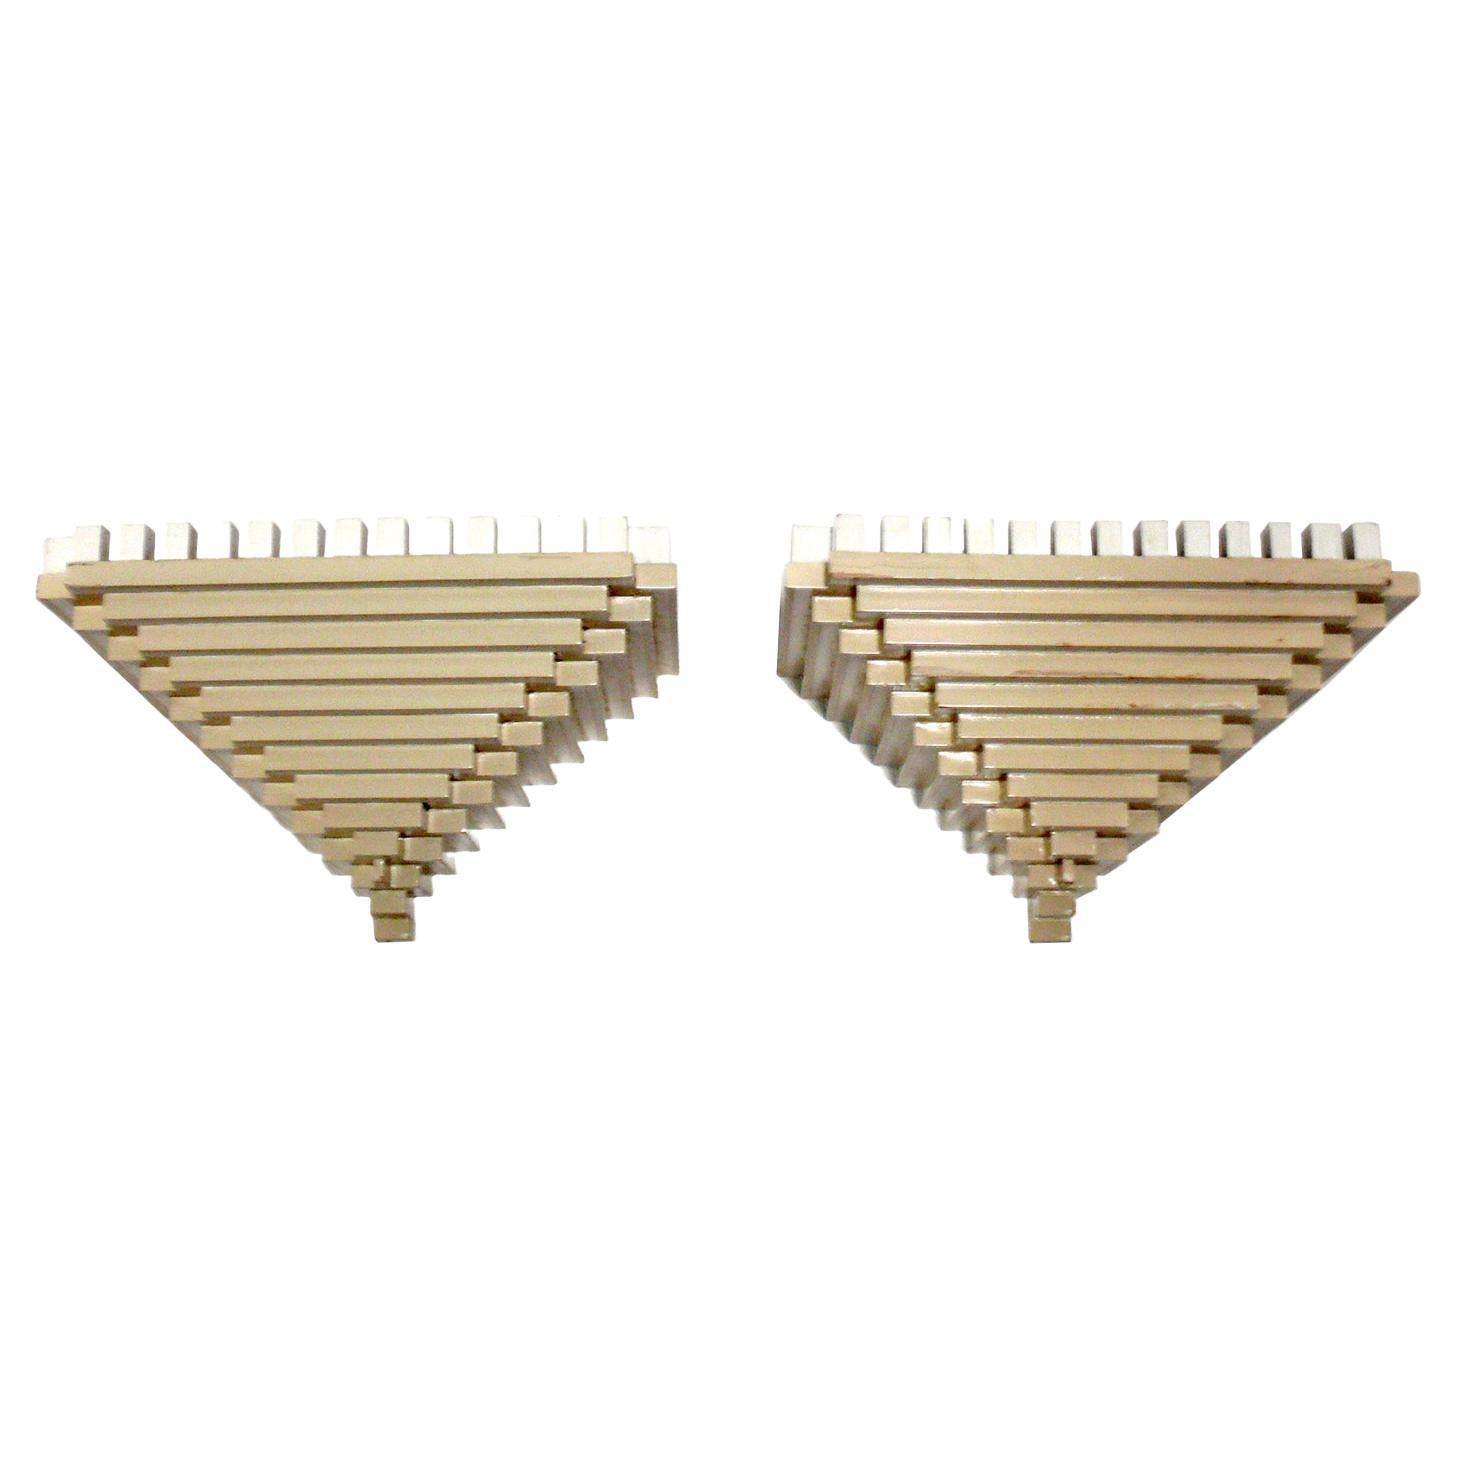 Lacquered Ziggurat Form Wall Shelves or Sconces